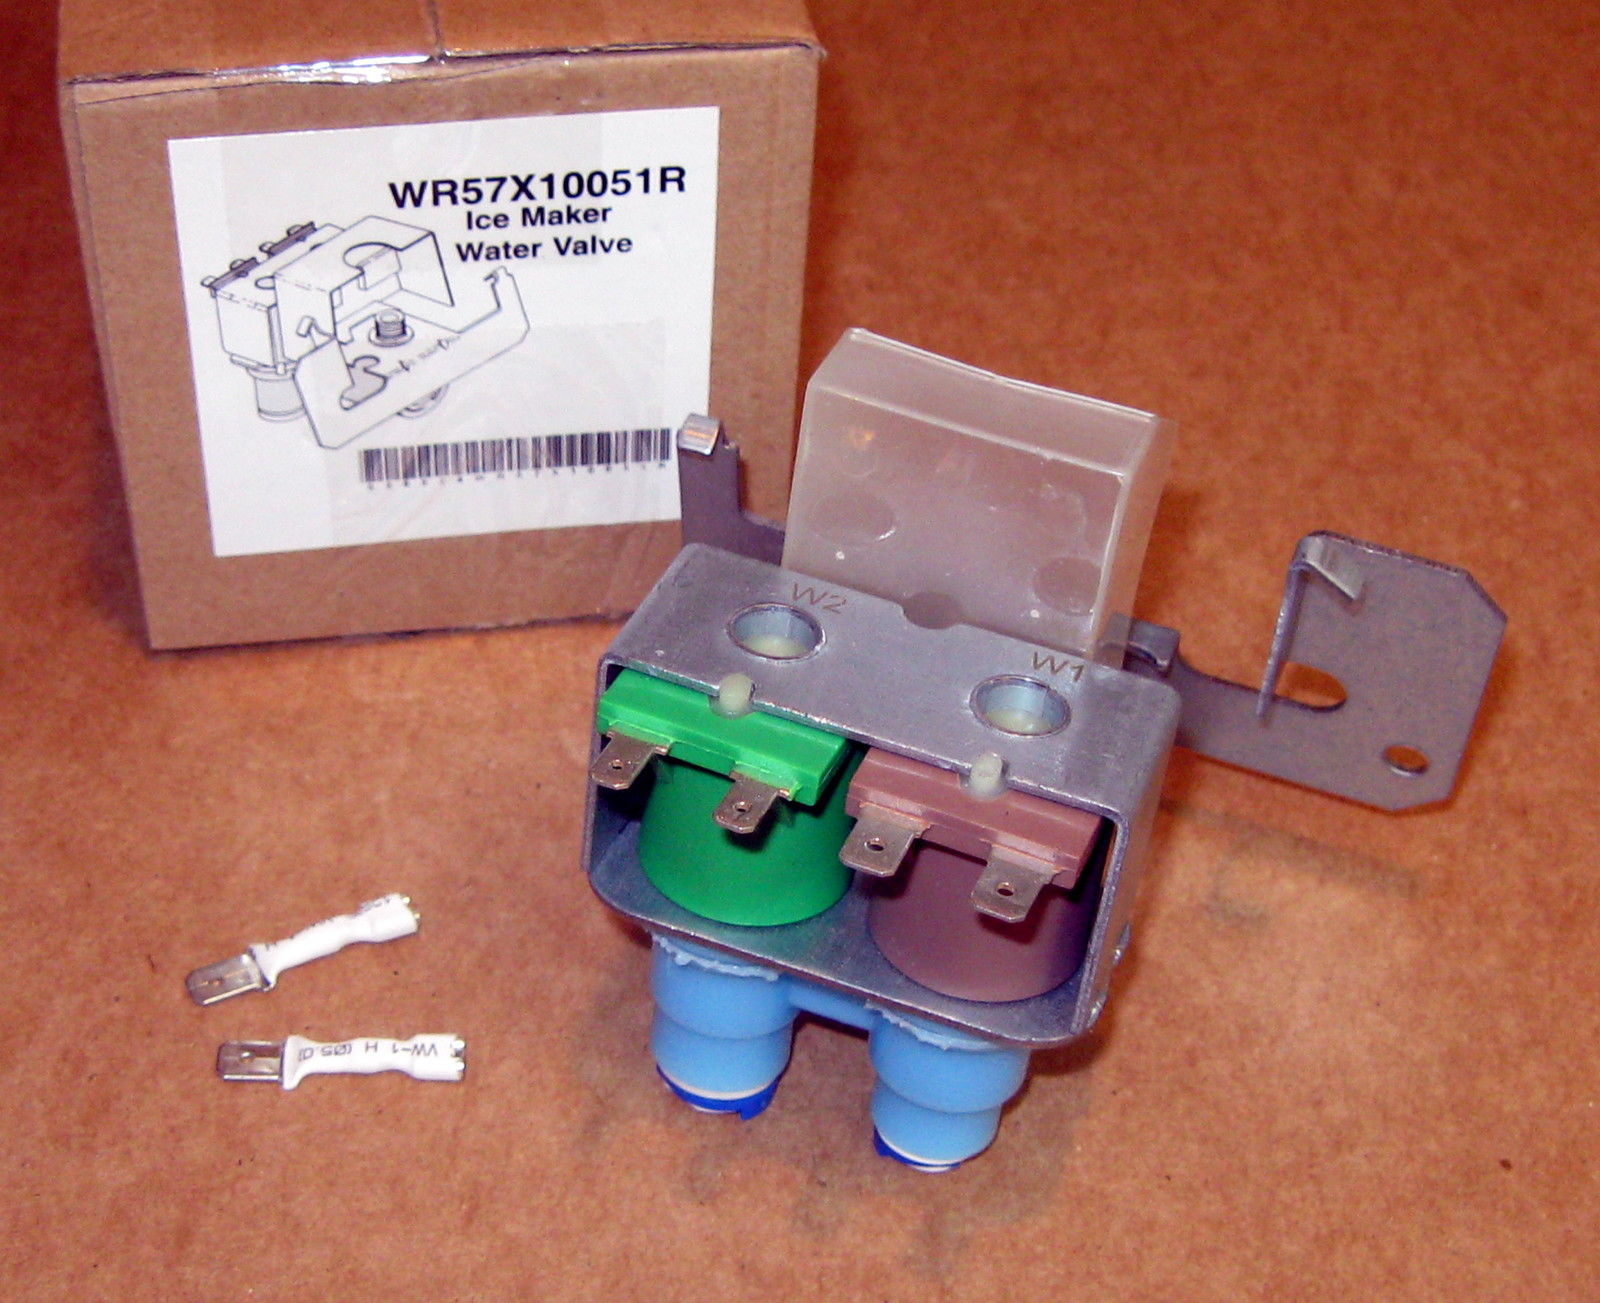 ERP WR57X10051 Refrigerator Water Valve (Replacement for GE WR57X10051) - image 4 of 4